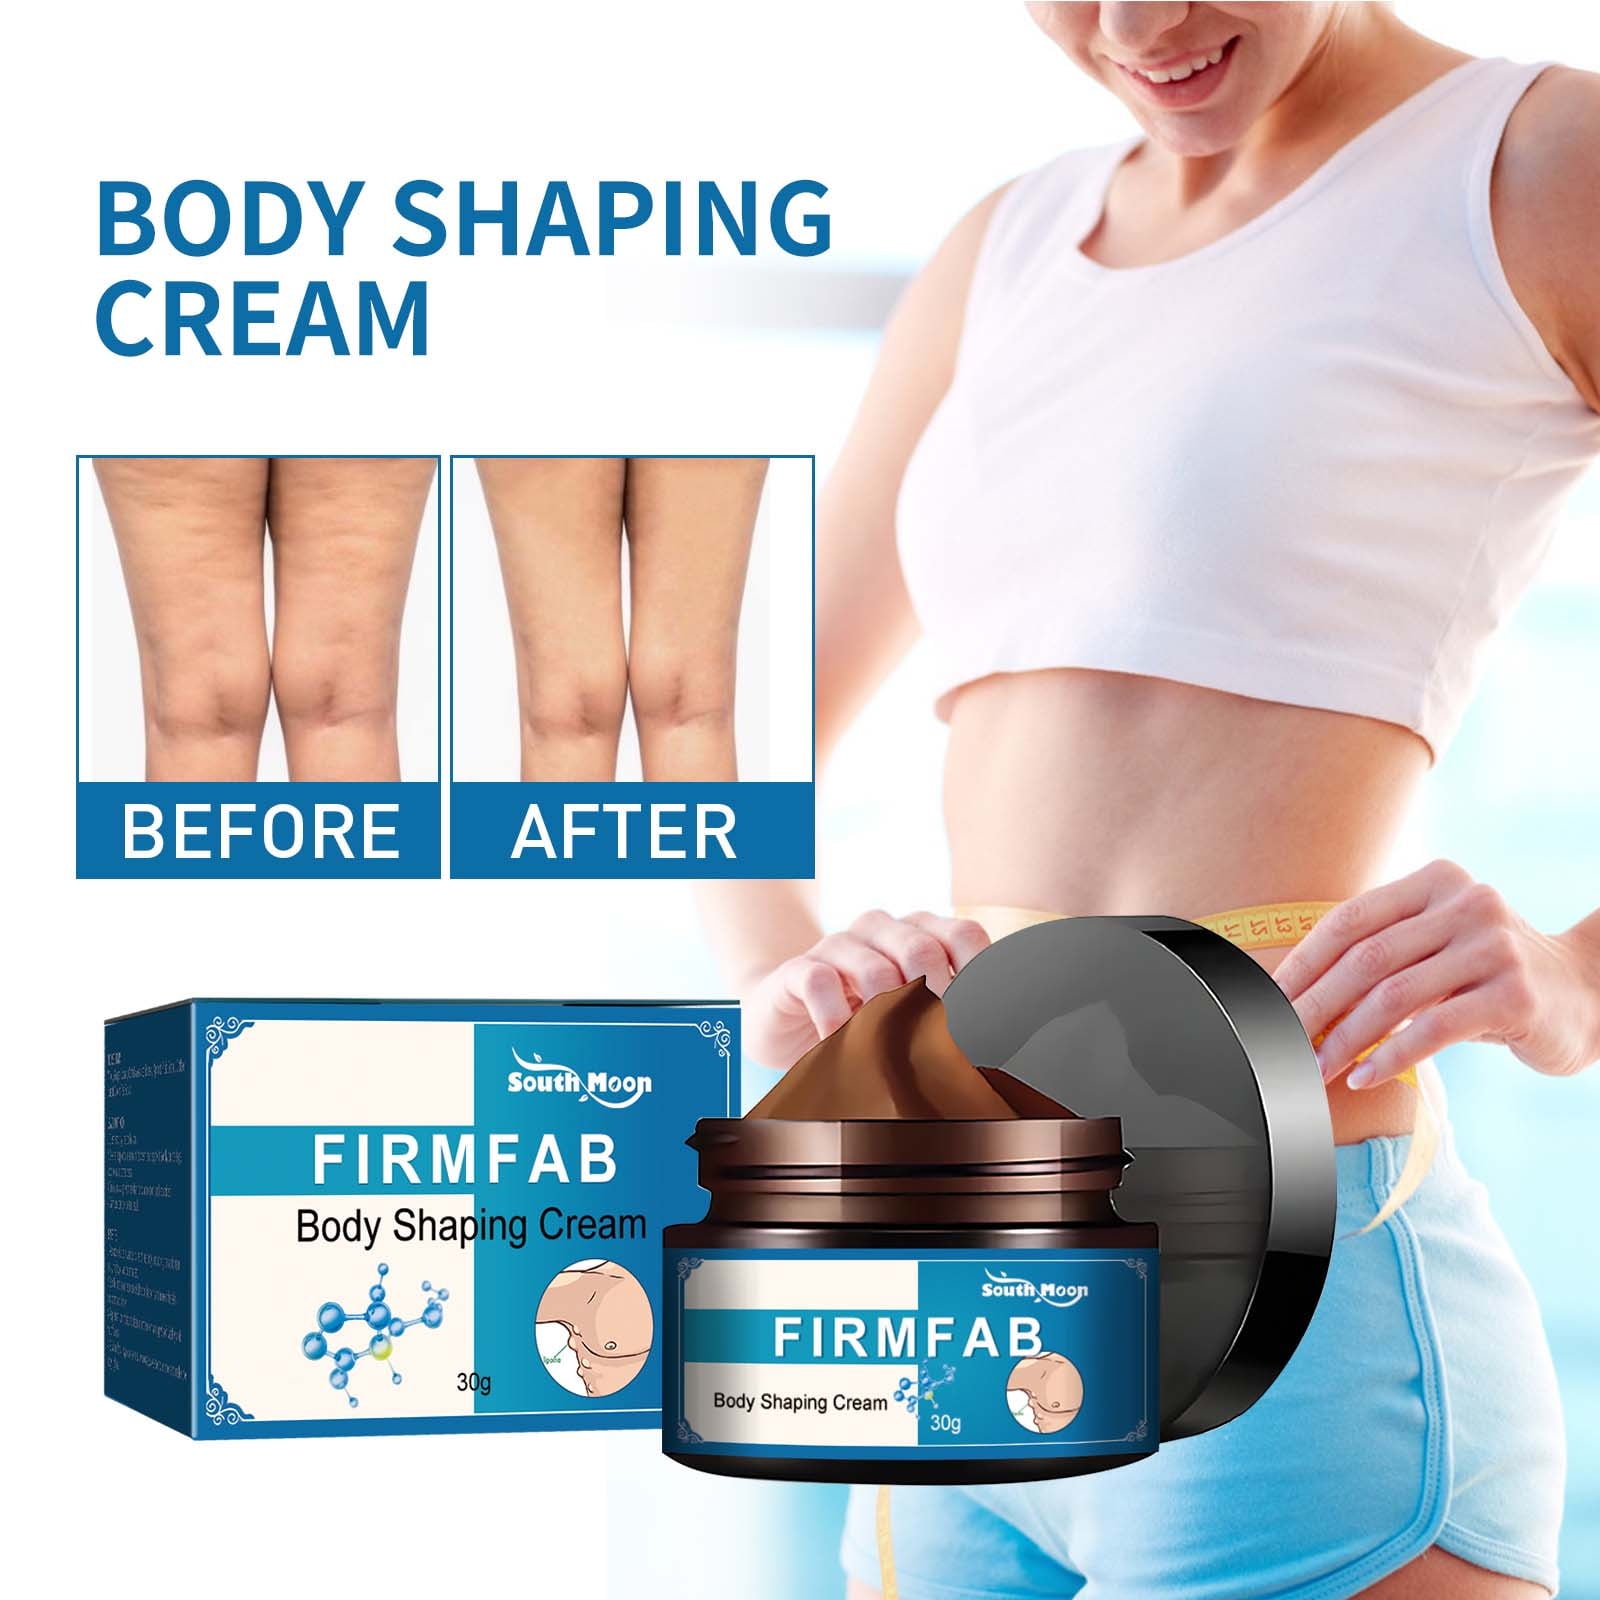 SDJMa Flat Belly Firming Cream - Skin Tightening & Cellulite Cream for  Stomach, Thighs Butt - Moisturizing Firming Lotion with Natural Ingredients  